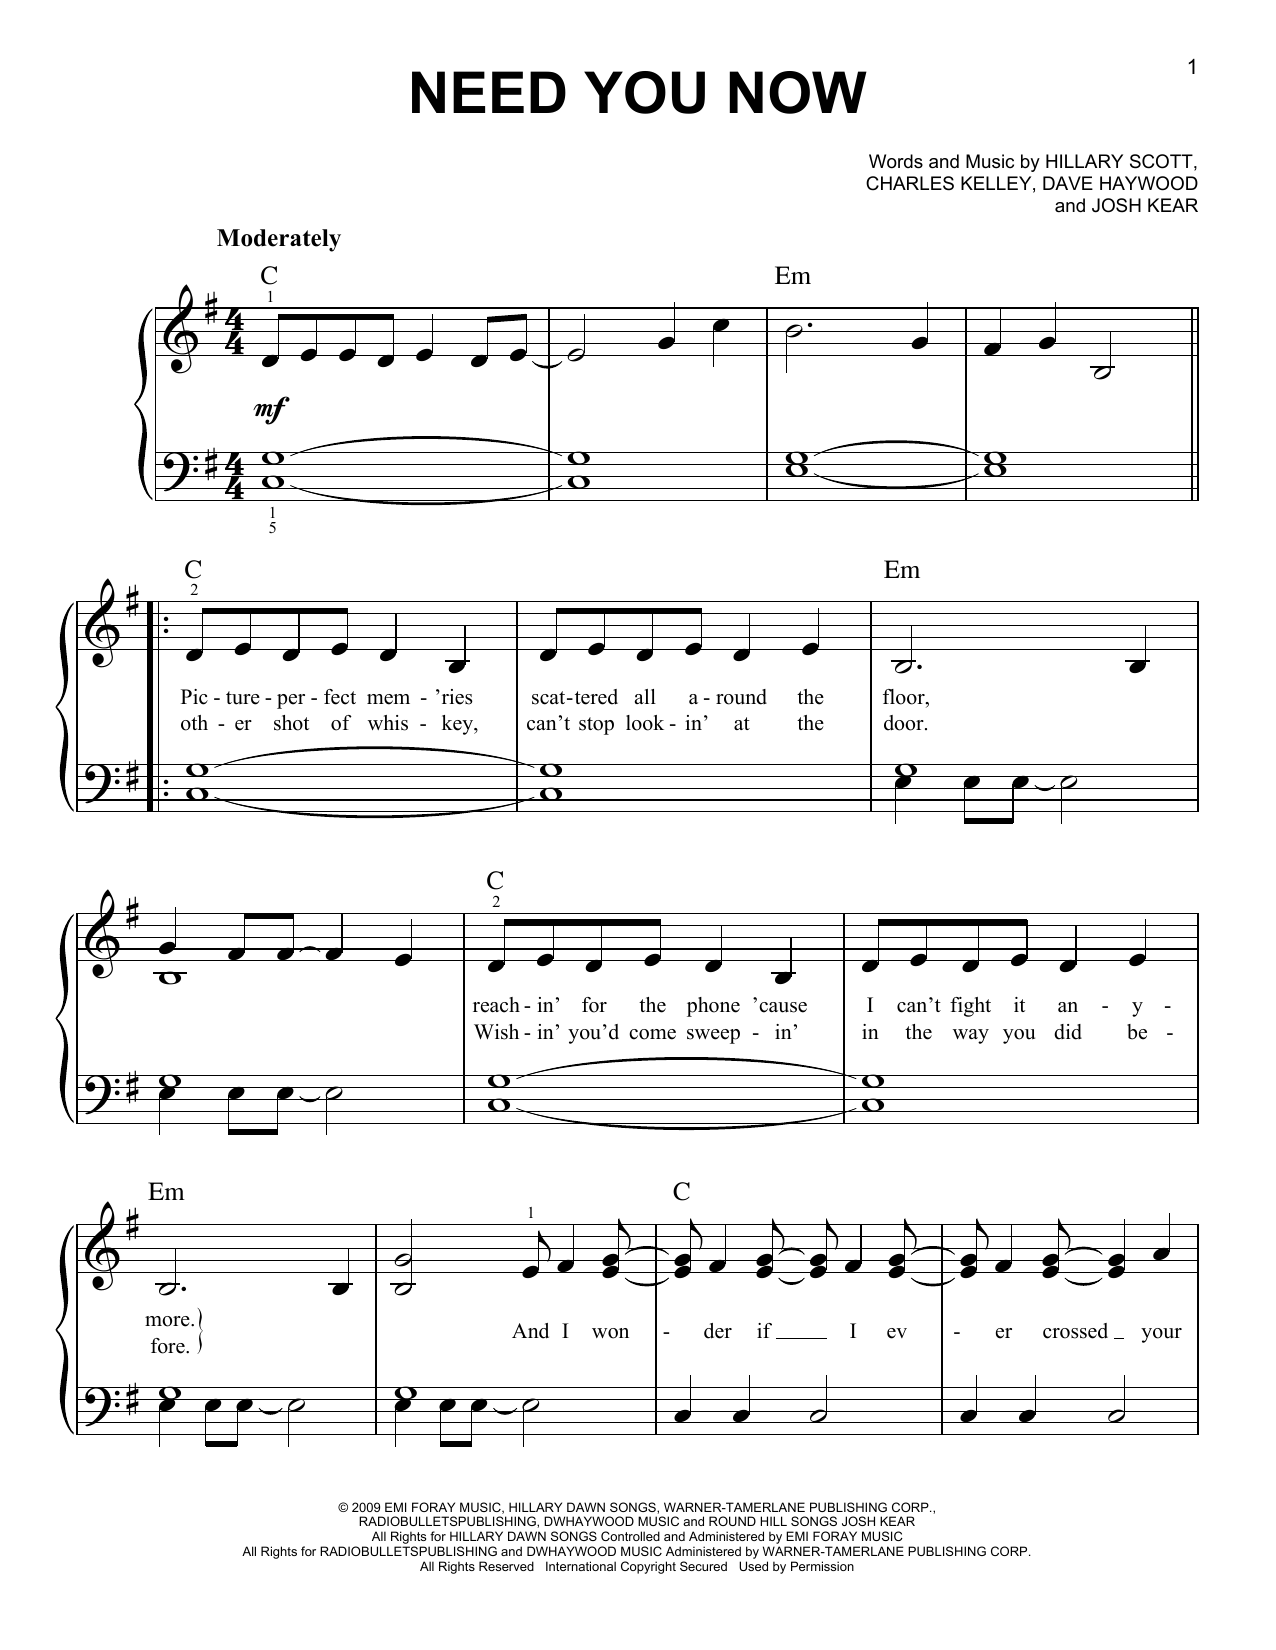 Download Lady Antebellum Need You Now Sheet Music